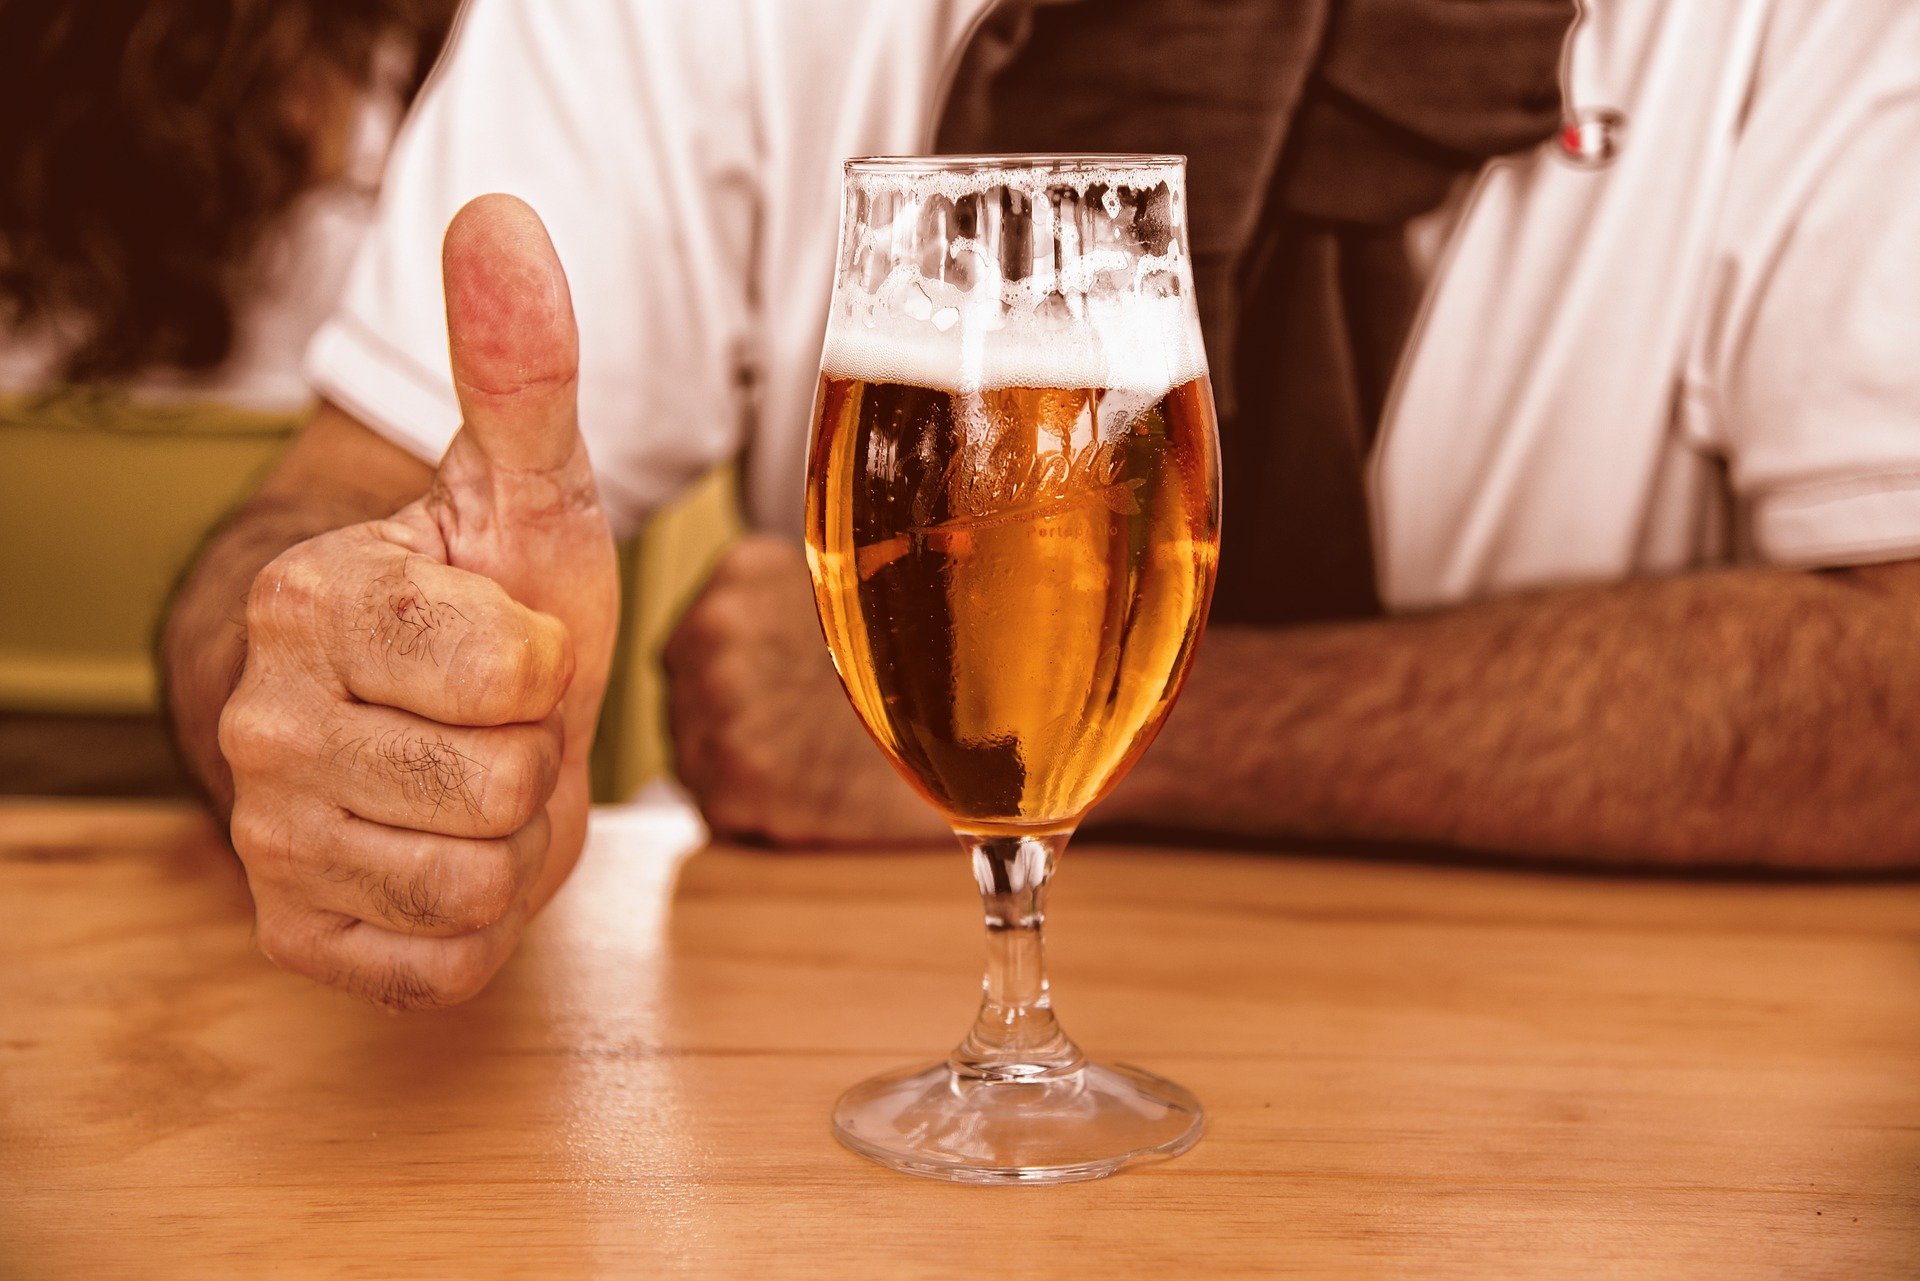 A man with a glass of beer. | Source: Pixabay